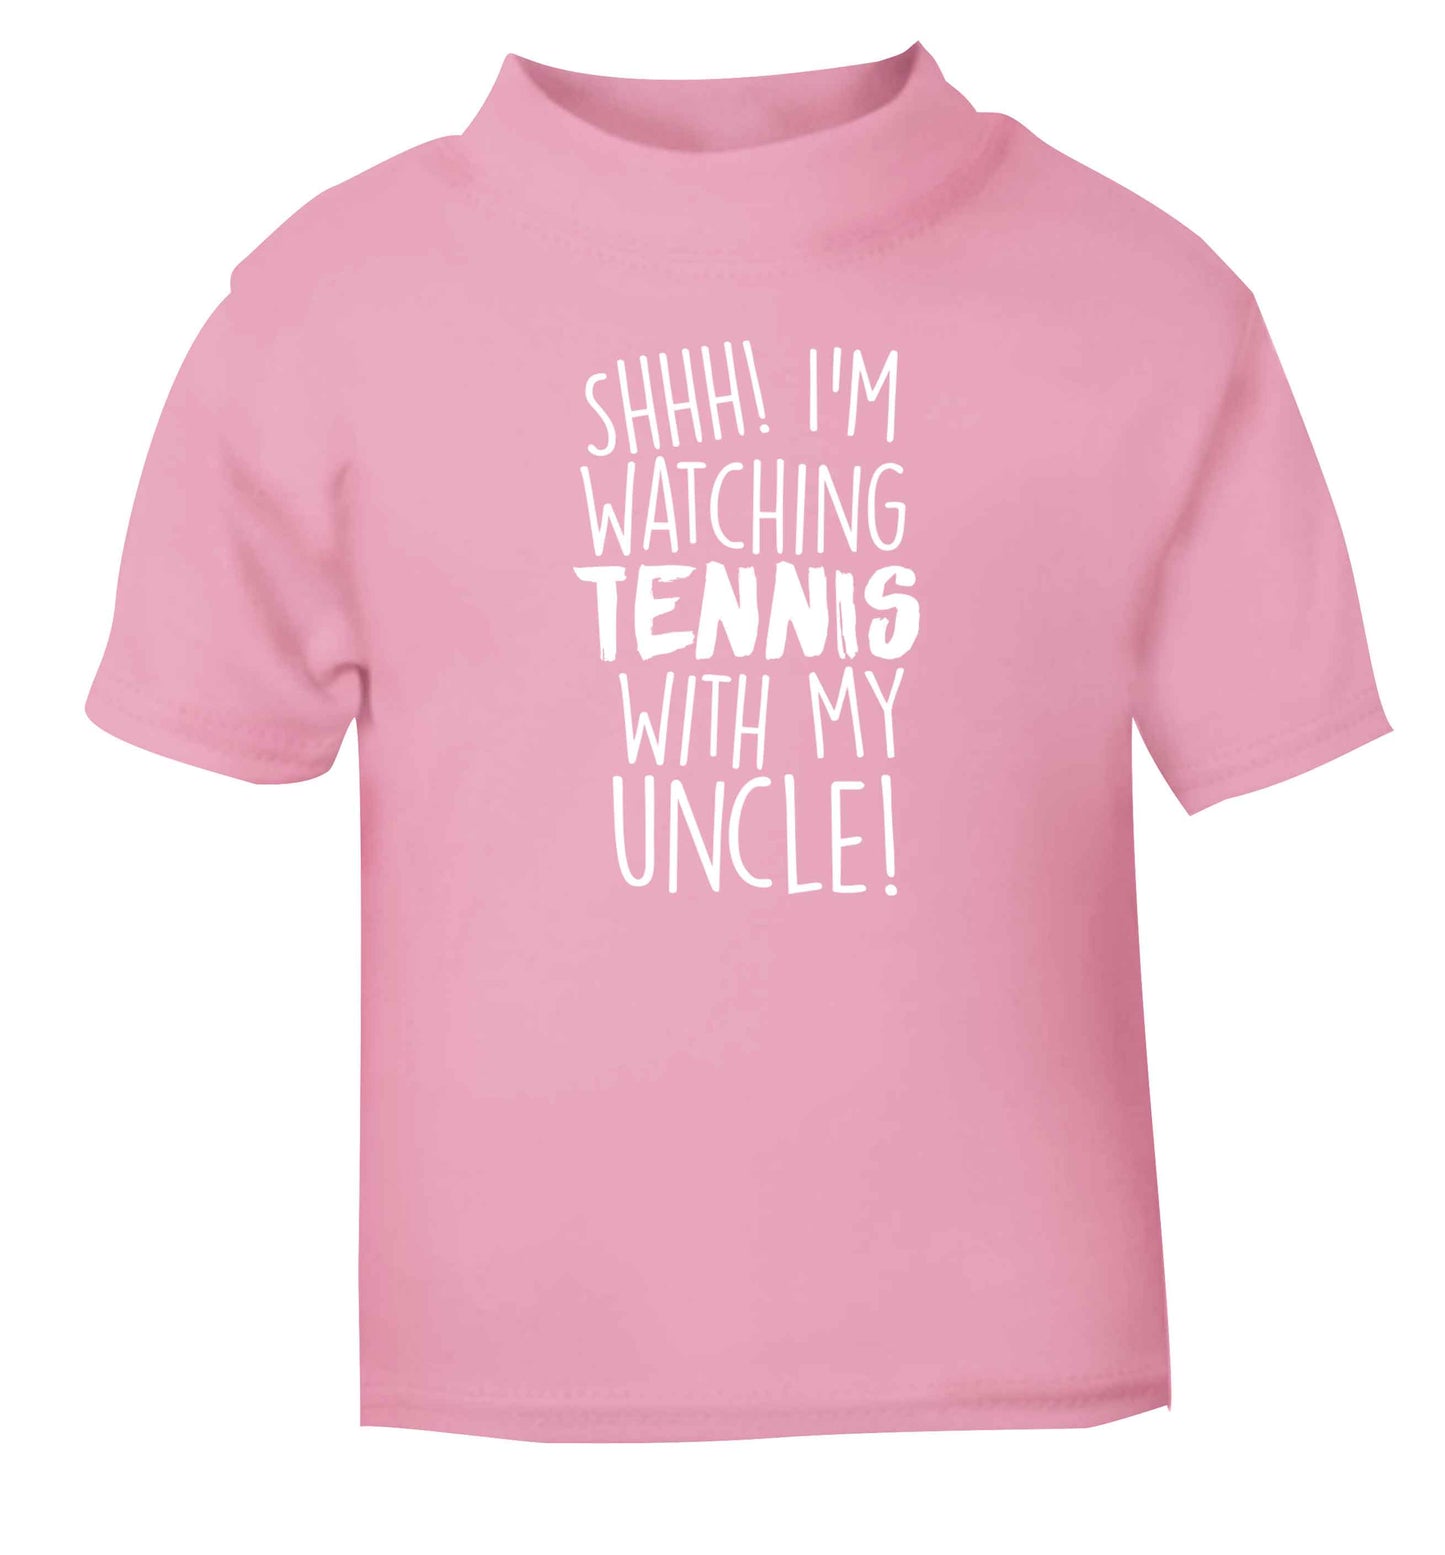 Shh! I'm watching tennis with my uncle! light pink Baby Toddler Tshirt 2 Years